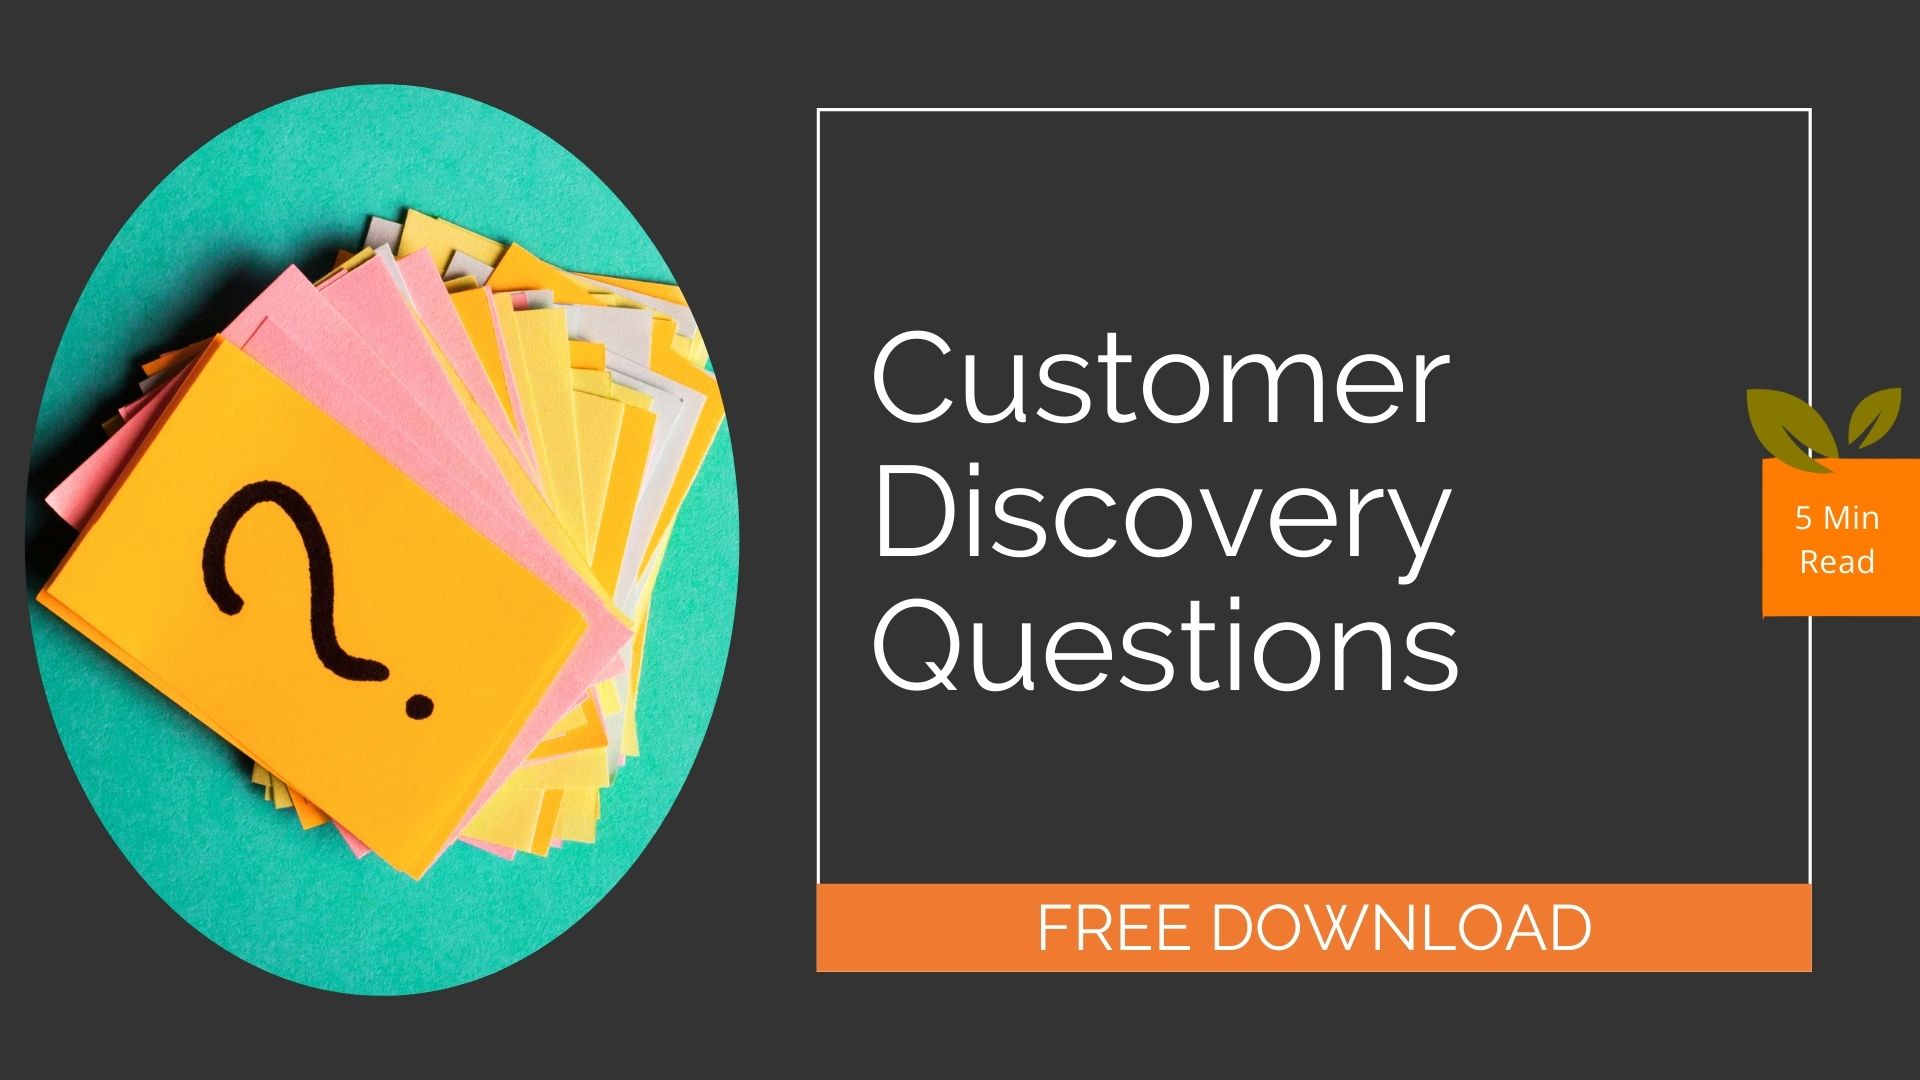 Customer discovery questions